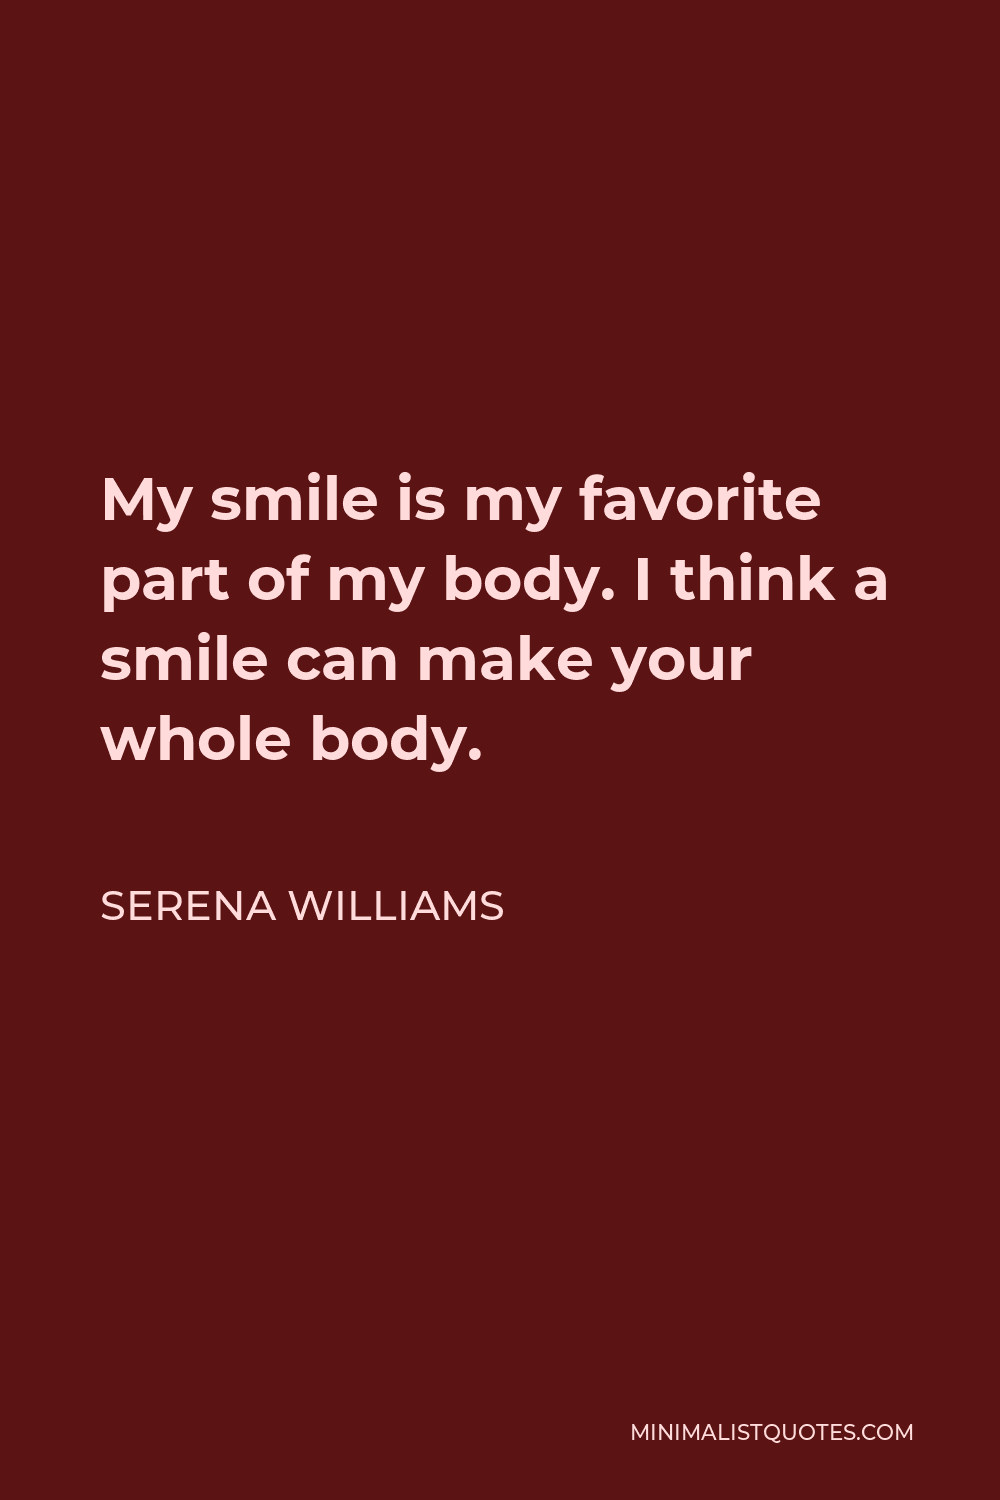 Serena Williams Quote - My smile is my favorite part of my body. I think a smile can make your whole body.